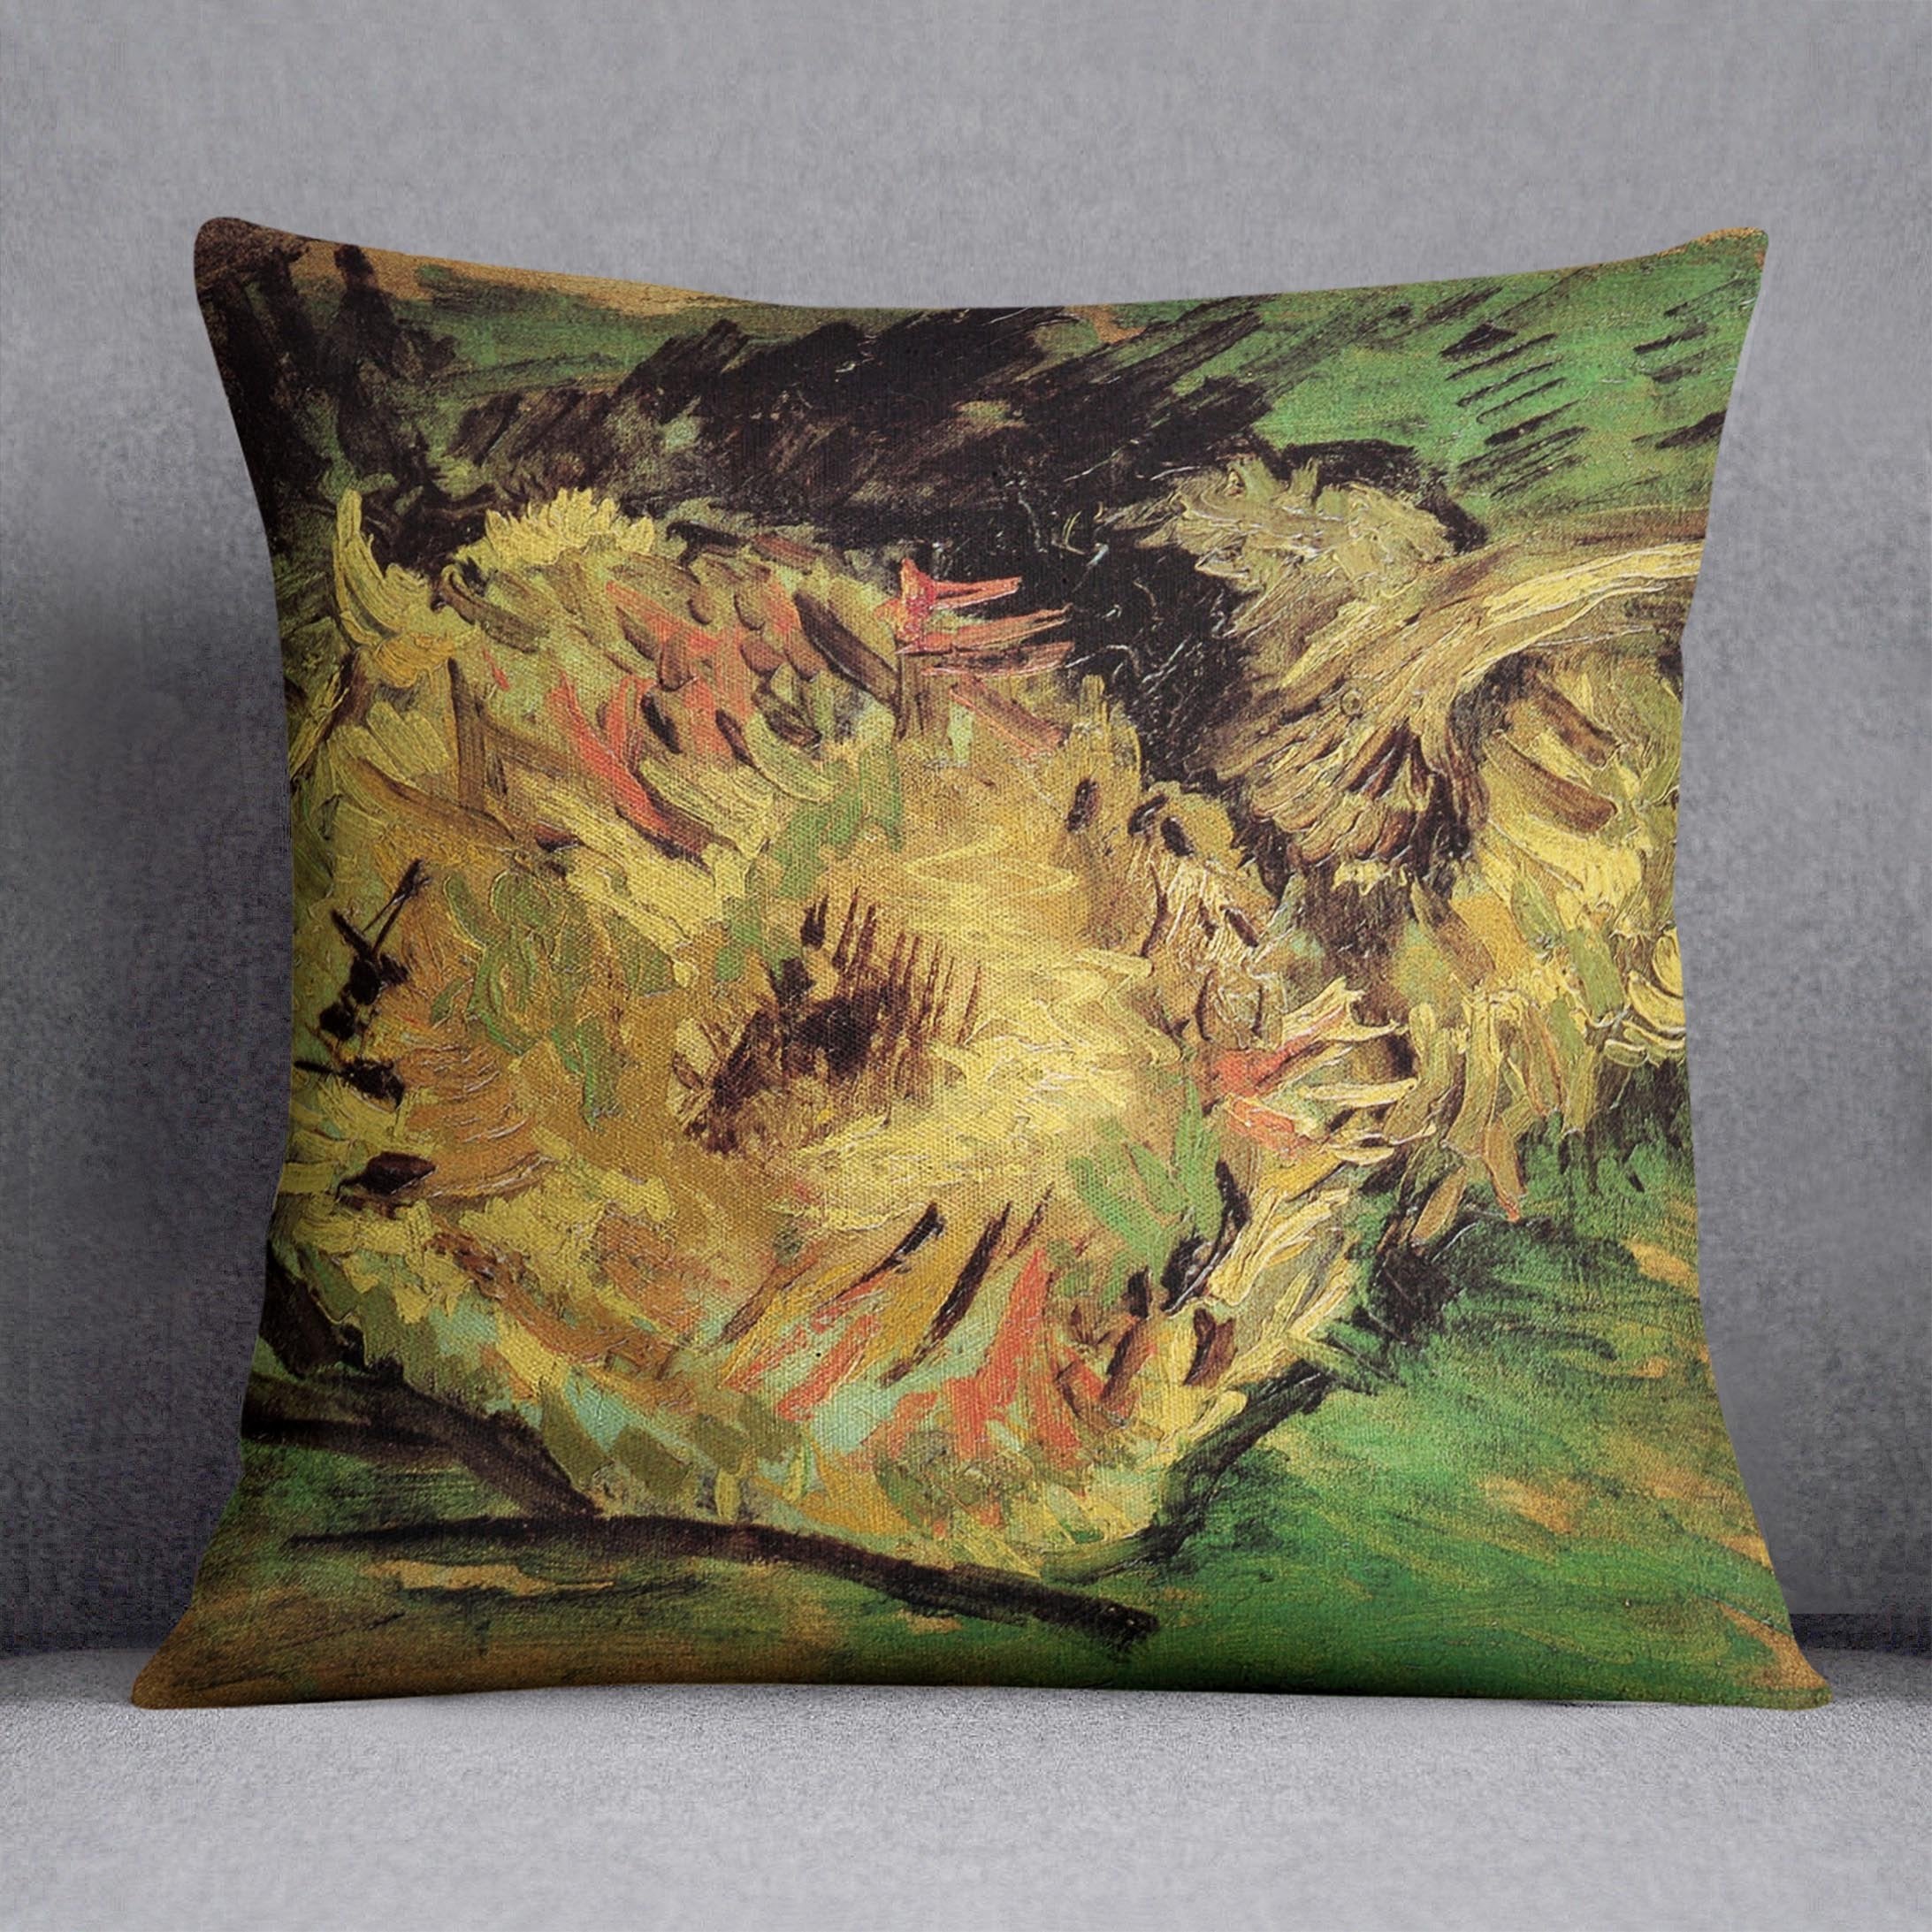 Two Cut Sunflowers by Van Gogh Throw Pillow